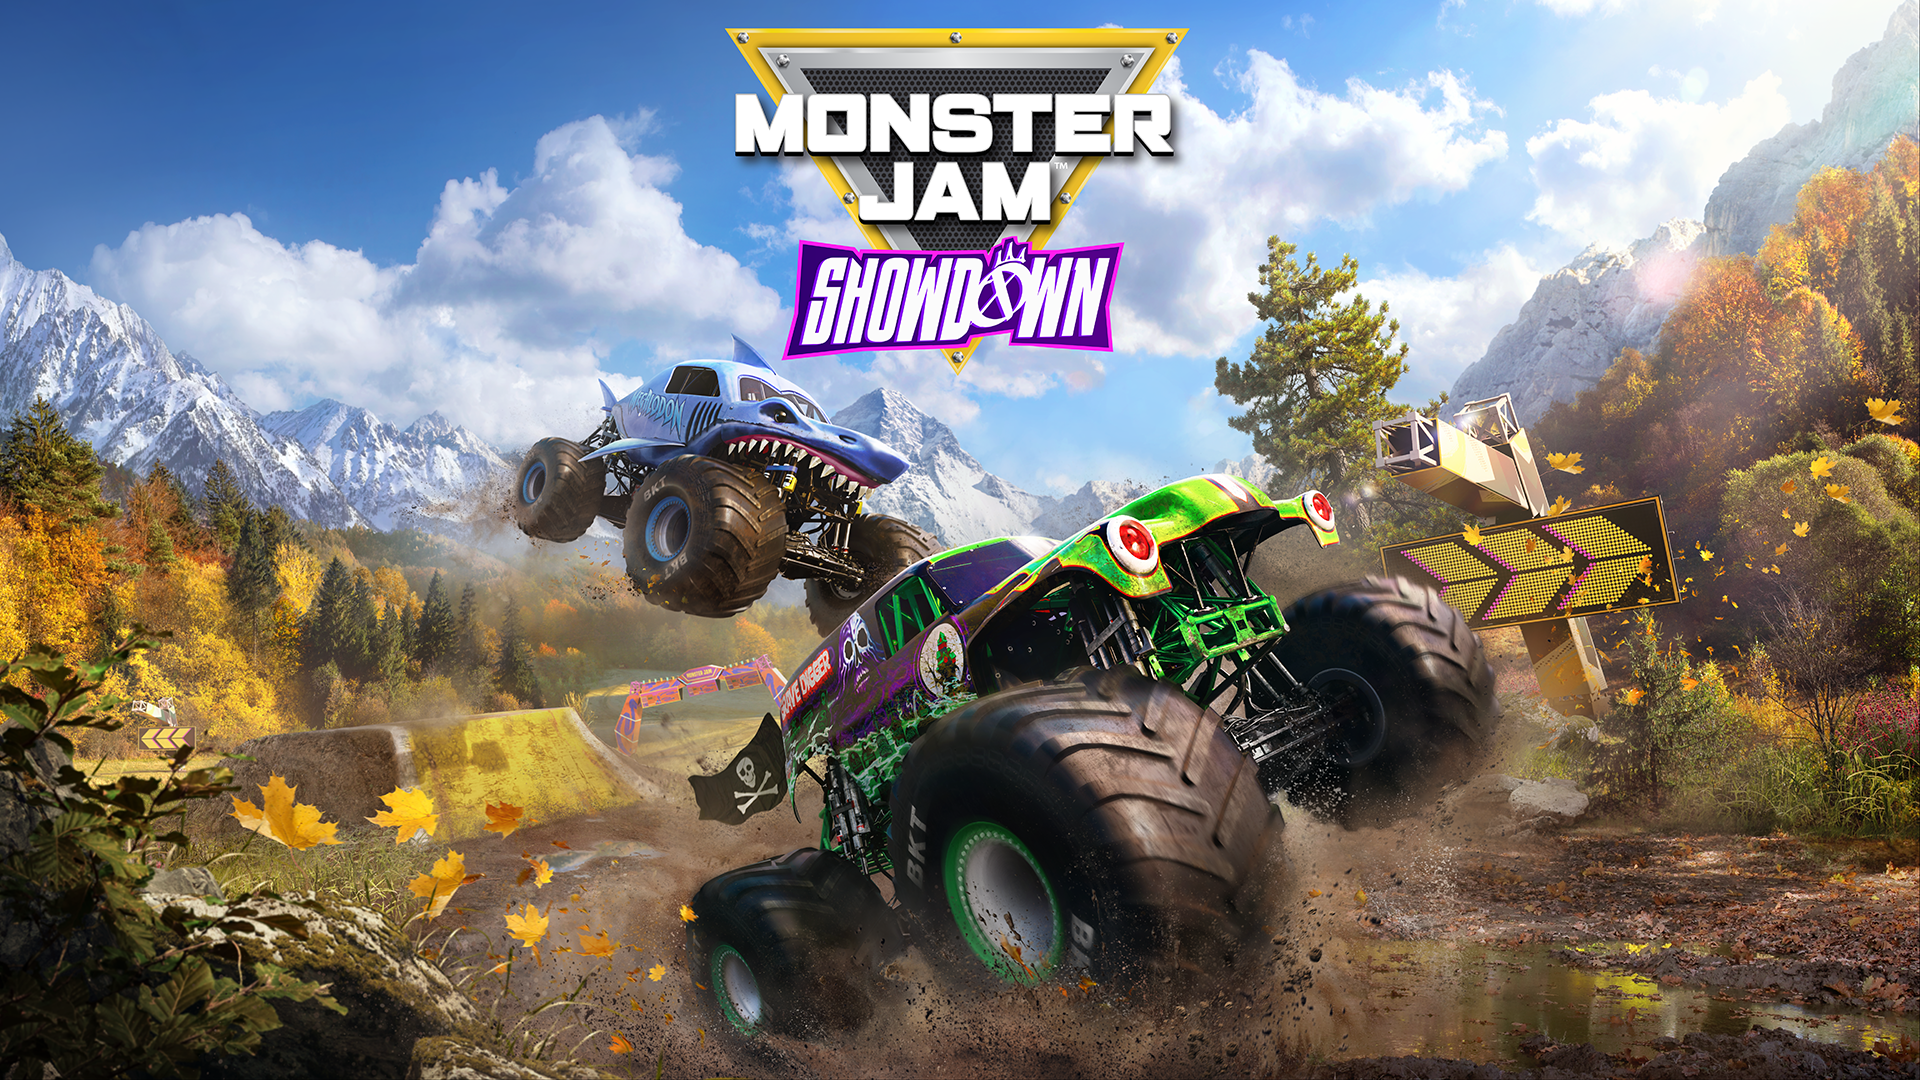 New Milestone Game Monster Jam Showdown set to Release in August